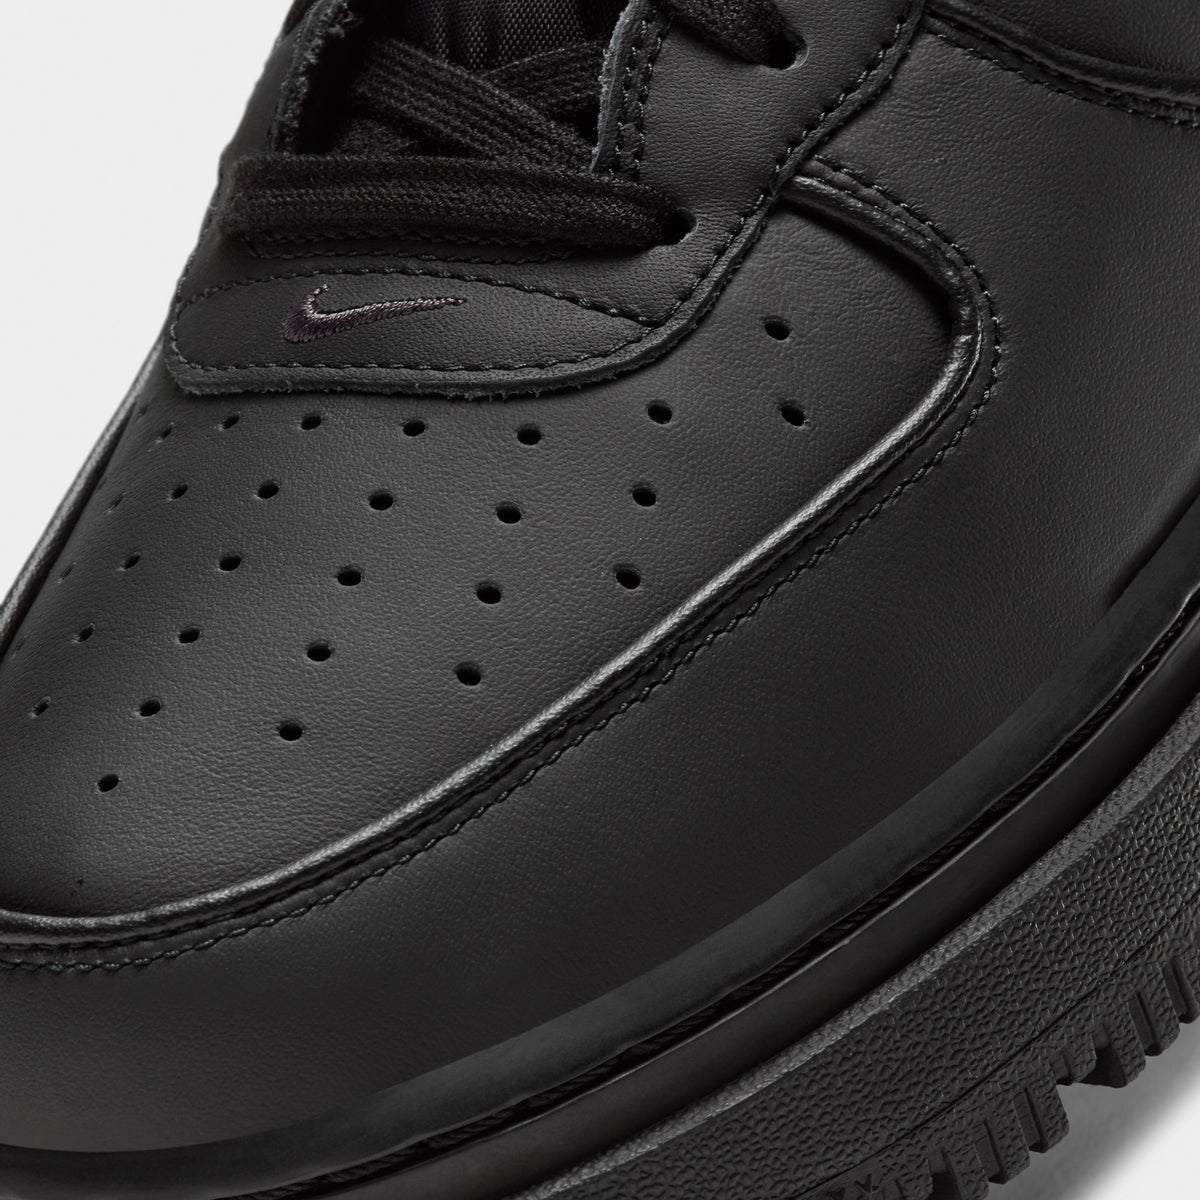 Nike Air Force 1 Boot Black / White - Anthracite | JD Sports Canada